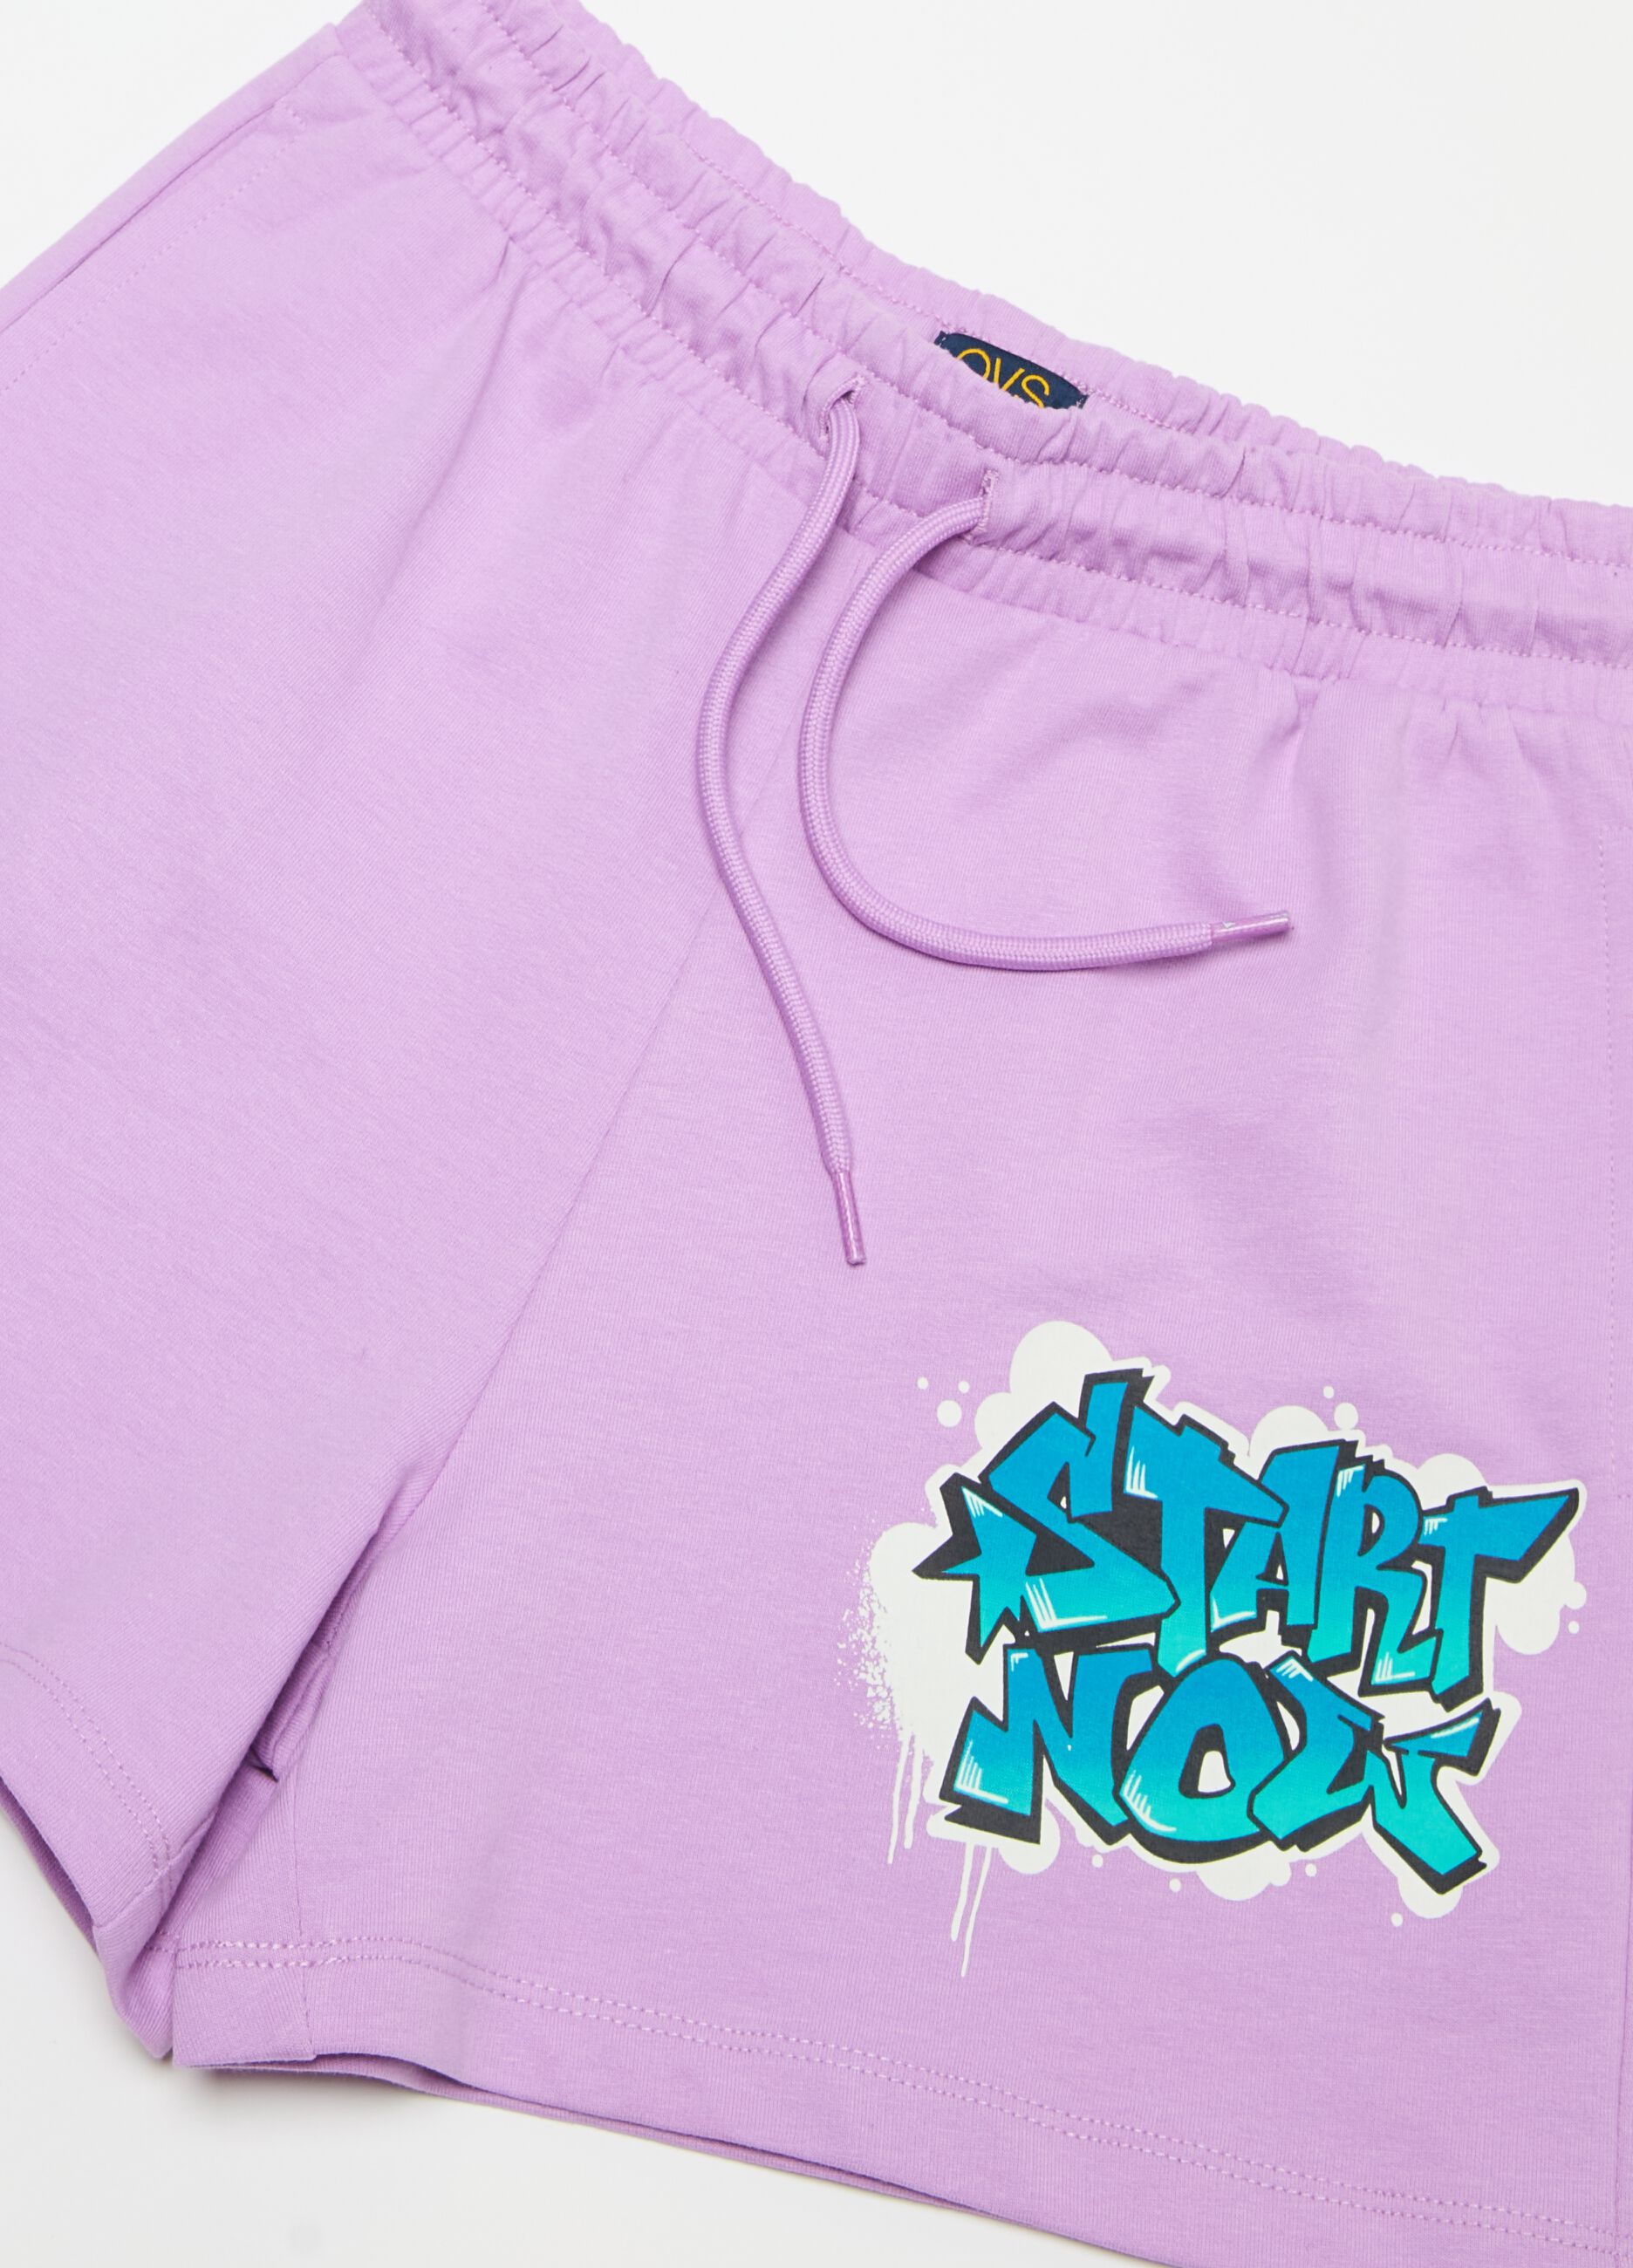 Shorts in French terry with graffiti print